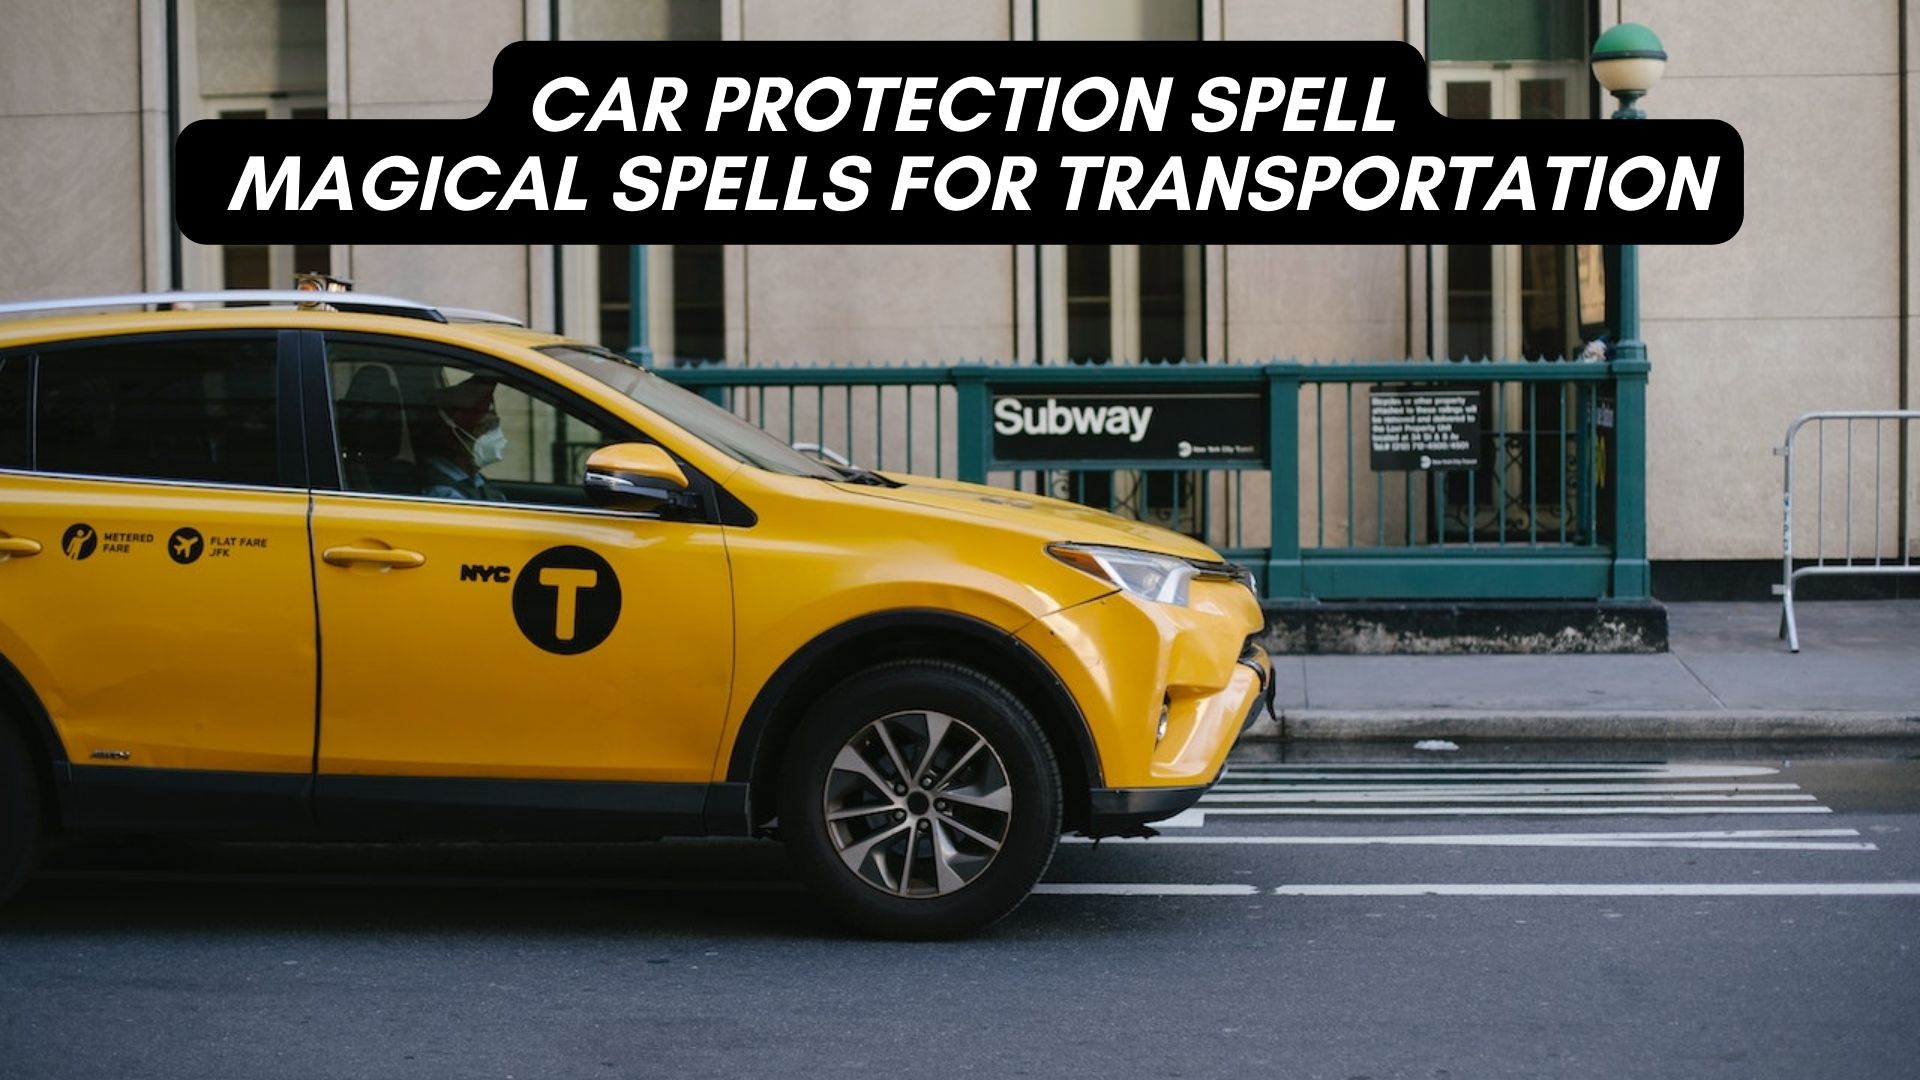 Car Protection Spell - Magical Spells For Safe Travel